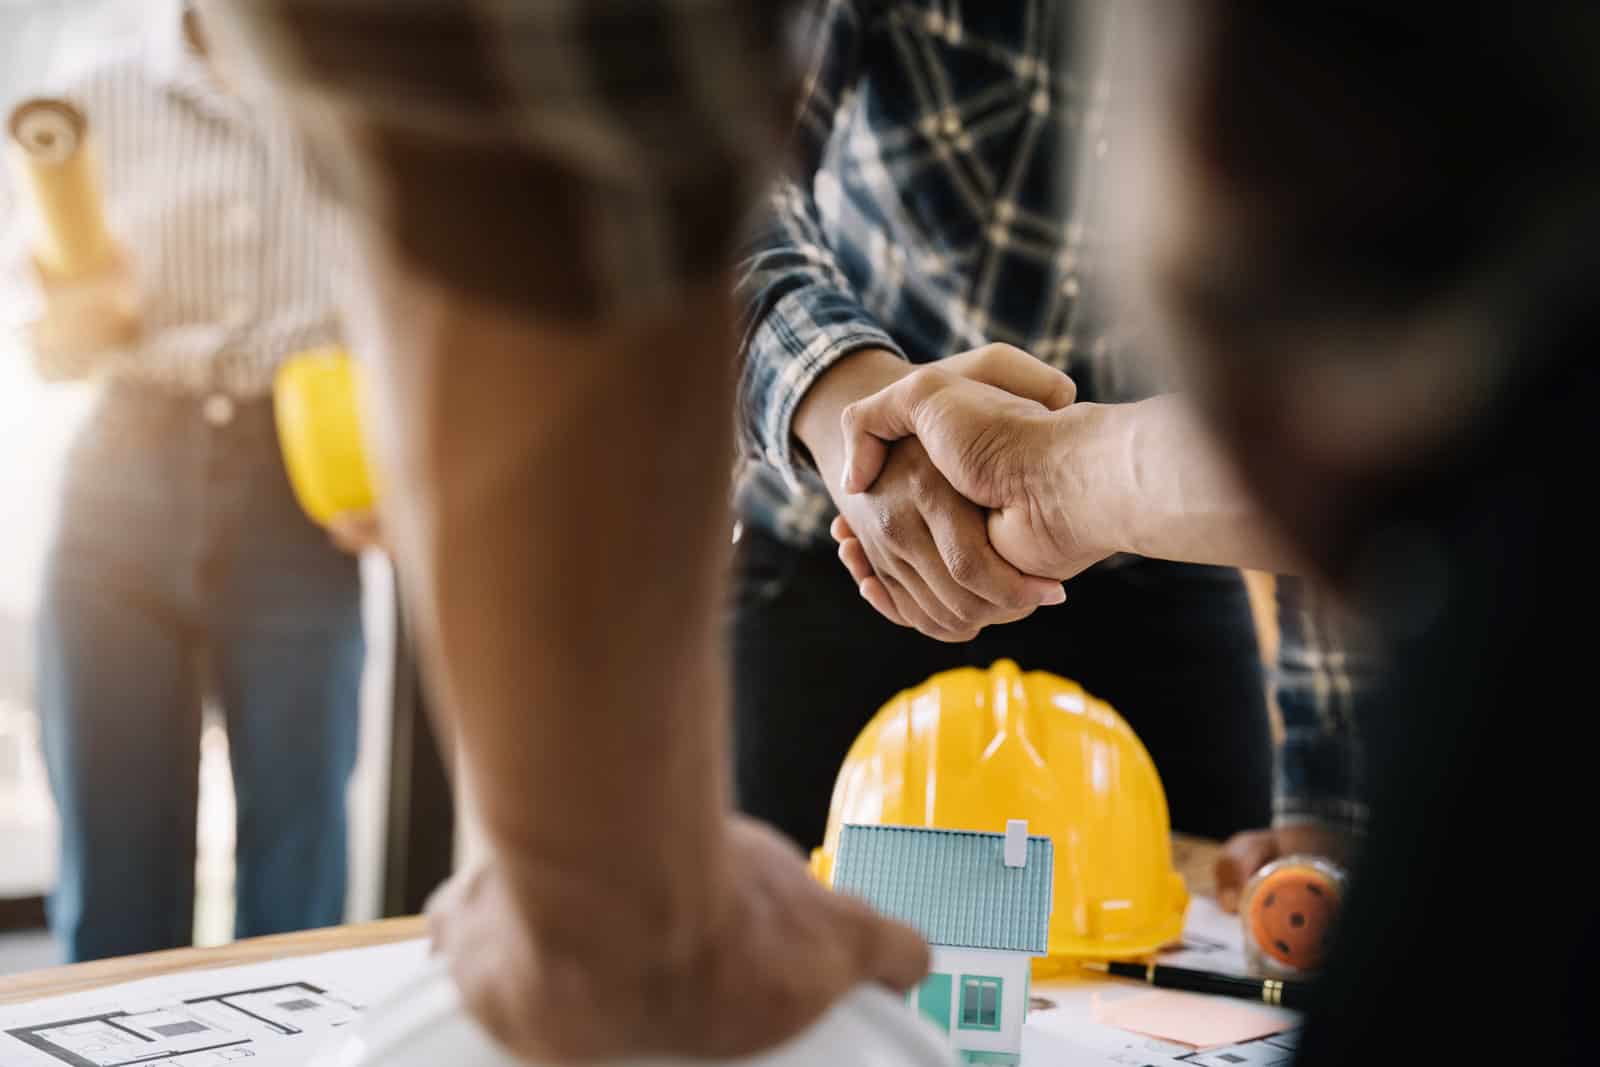 construction workers, architects and engineers shake hands while working for teamwork and cooperation after completing an agreement in an office facility, successful cooperation concept.